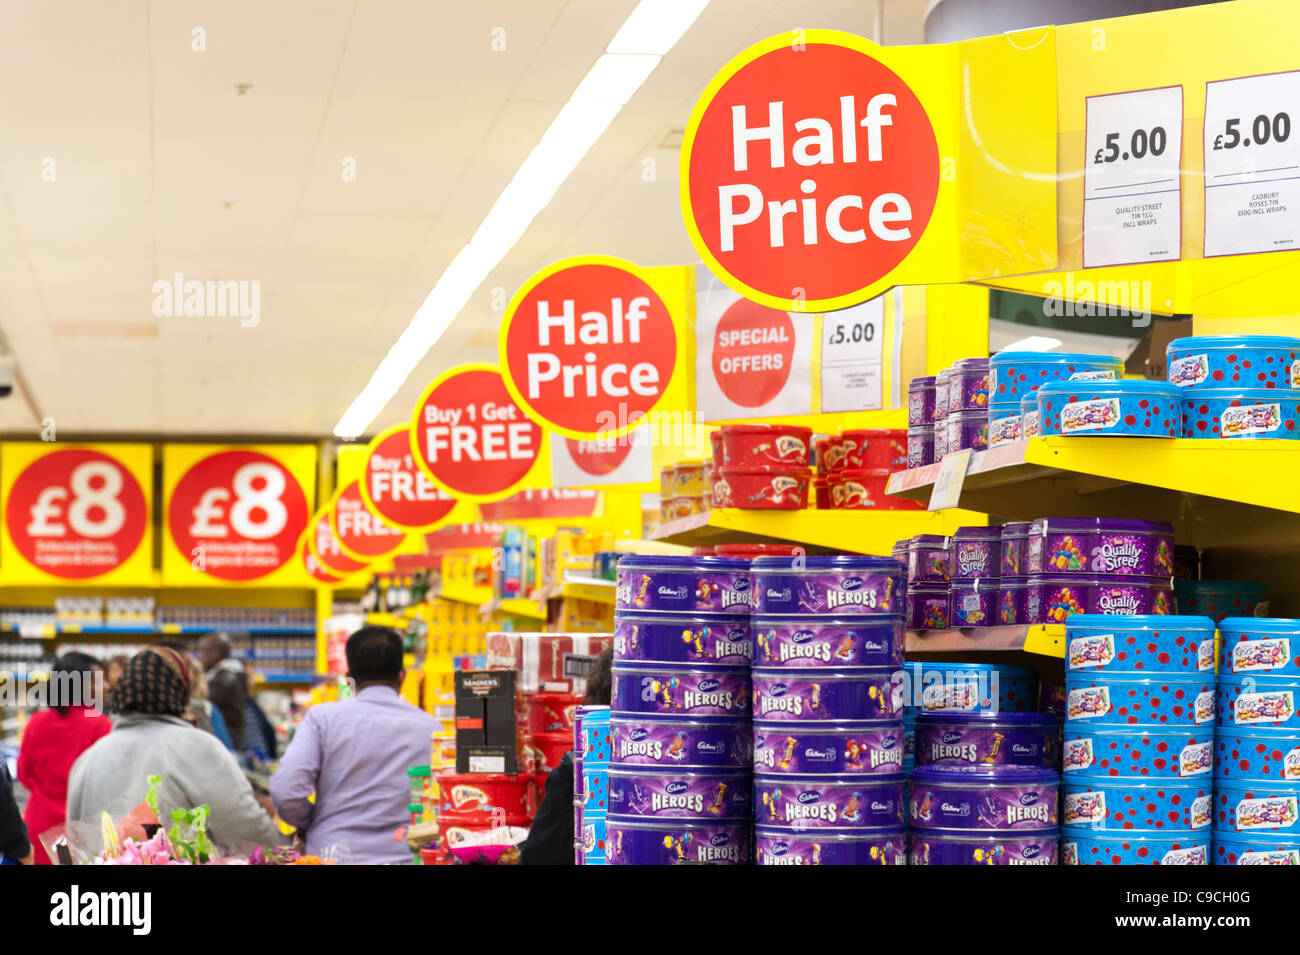 Half price and special offers signs at Tesco Extra supermarket, England, UK Stock Photo